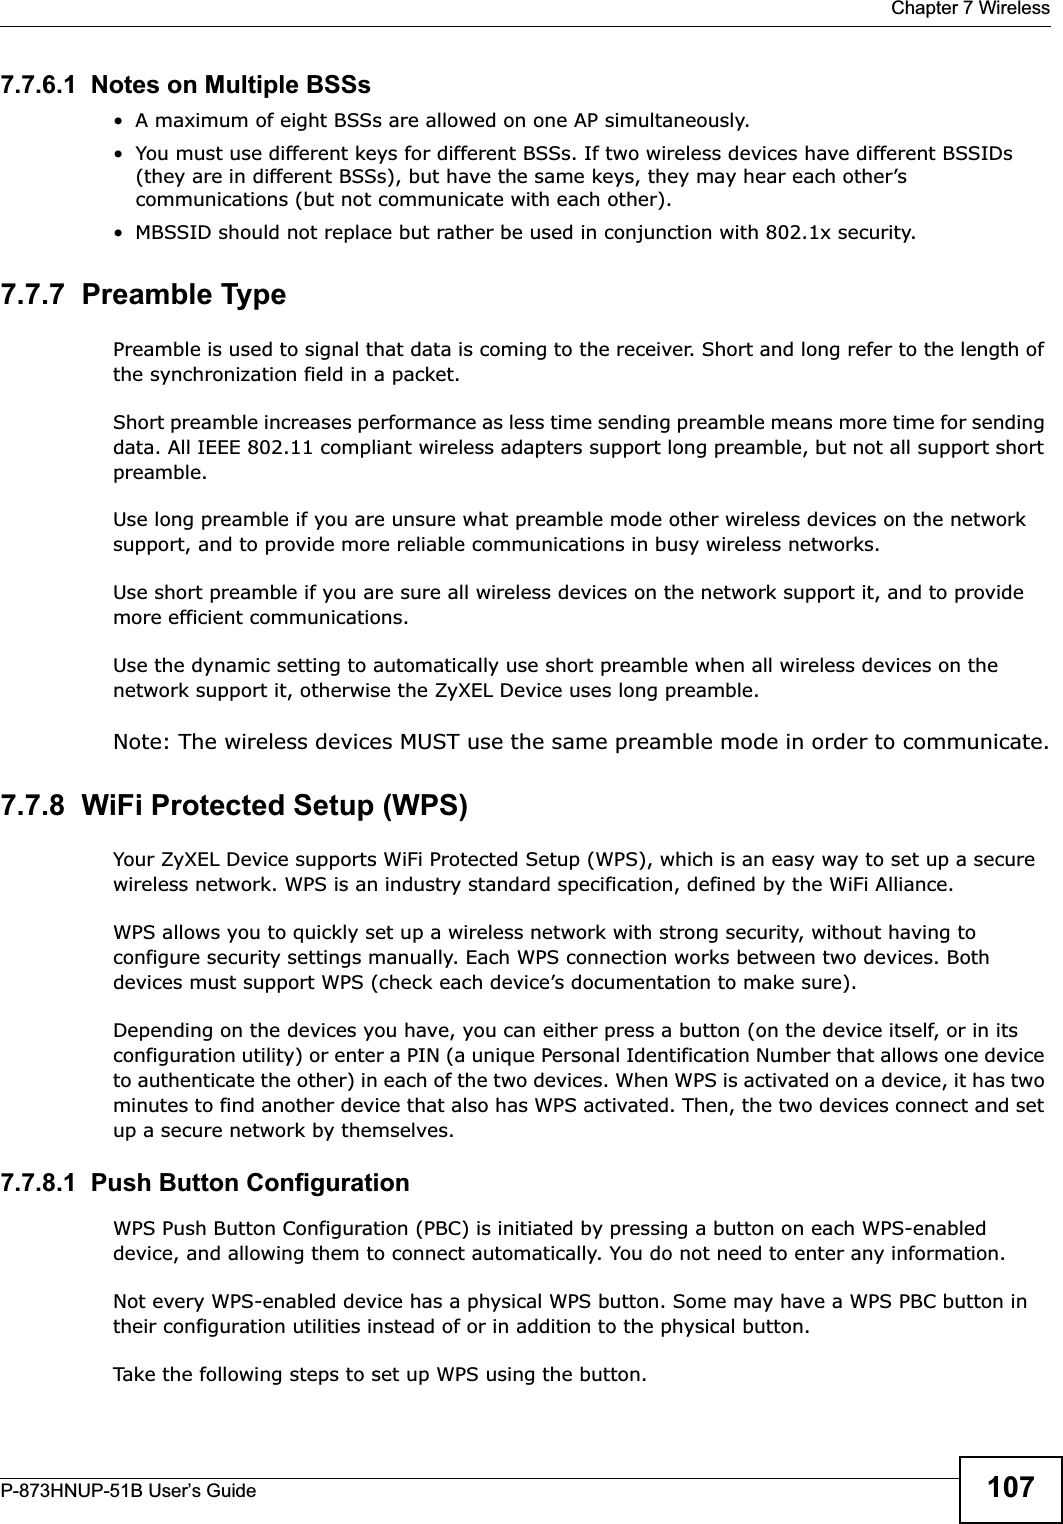  Chapter 7 WirelessP-873HNUP-51B User’s Guide 1077.7.6.1  Notes on Multiple BSSs• A maximum of eight BSSs are allowed on one AP simultaneously.• You must use different keys for different BSSs. If two wireless devices have different BSSIDs (they are in different BSSs), but have the same keys, they may hear each other’s communications (but not communicate with each other).• MBSSID should not replace but rather be used in conjunction with 802.1x security.7.7.7  Preamble TypePreamble is used to signal that data is coming to the receiver. Short and long refer to the length of the synchronization field in a packet.Short preamble increases performance as less time sending preamble means more time for sending data. All IEEE 802.11 compliant wireless adapters support long preamble, but not all support short preamble. Use long preamble if you are unsure what preamble mode other wireless devices on the network support, and to provide more reliable communications in busy wireless networks. Use short preamble if you are sure all wireless devices on the network support it, and to provide more efficient communications.Use the dynamic setting to automatically use short preamble when all wireless devices on the network support it, otherwise the ZyXEL Device uses long preamble.Note: The wireless devices MUST use the same preamble mode in order to communicate.7.7.8  WiFi Protected Setup (WPS)Your ZyXEL Device supports WiFi Protected Setup (WPS), which is an easy way to set up a secure wireless network. WPS is an industry standard specification, defined by the WiFi Alliance.WPS allows you to quickly set up a wireless network with strong security, without having to configure security settings manually. Each WPS connection works between two devices. Both devices must support WPS (check each device’s documentation to make sure). Depending on the devices you have, you can either press a button (on the device itself, or in its configuration utility) or enter a PIN (a unique Personal Identification Number that allows one device to authenticate the other) in each of the two devices. When WPS is activated on a device, it has two minutes to find another device that also has WPS activated. Then, the two devices connect and set up a secure network by themselves.7.7.8.1  Push Button ConfigurationWPS Push Button Configuration (PBC) is initiated by pressing a button on each WPS-enabled device, and allowing them to connect automatically. You do not need to enter any information. Not every WPS-enabled device has a physical WPS button. Some may have a WPS PBC button in their configuration utilities instead of or in addition to the physical button.Take the following steps to set up WPS using the button.